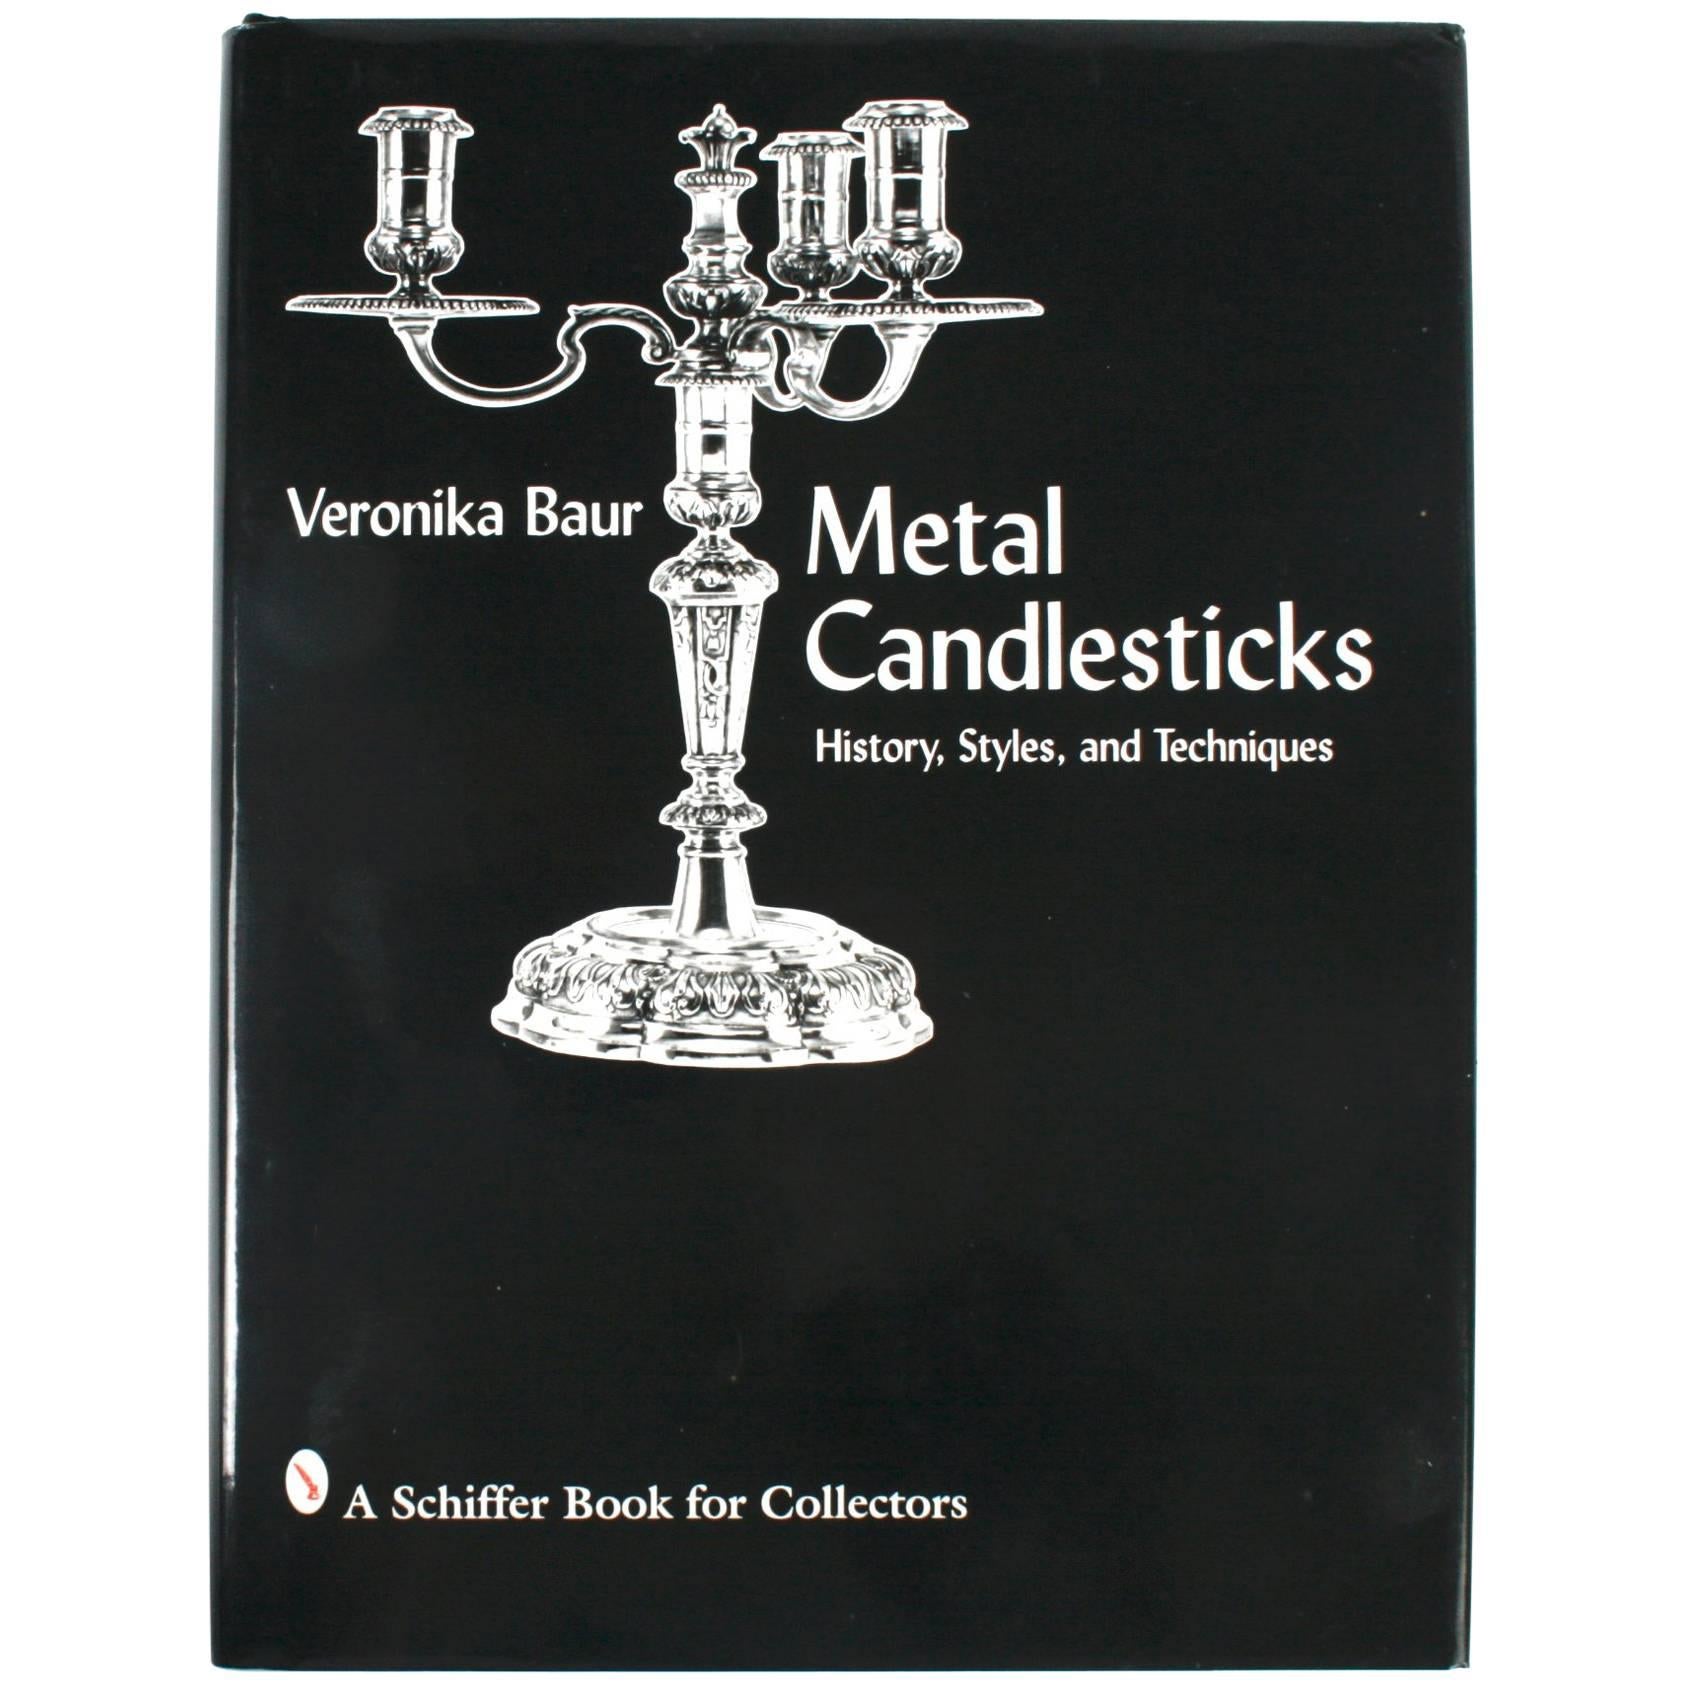 Metal Candlesticks, History, Styles and Techniques by Veronica Baur 1st Ed